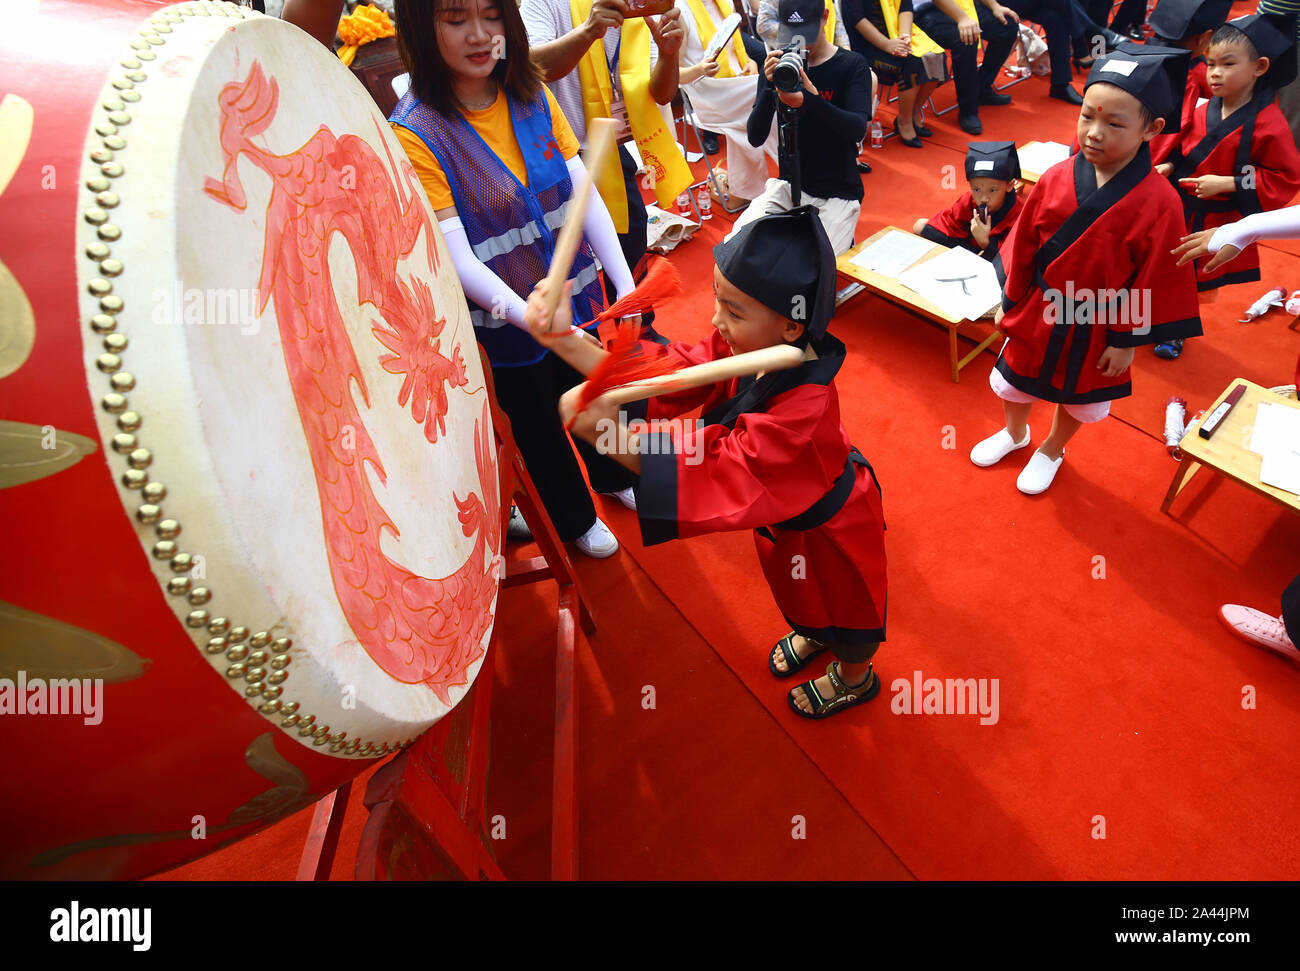 Over 30 pre-school children dressed in traditional Han-style costumes attend their 'first writing' ceremony at the Chinese Confucius Temple School in Stock Photo